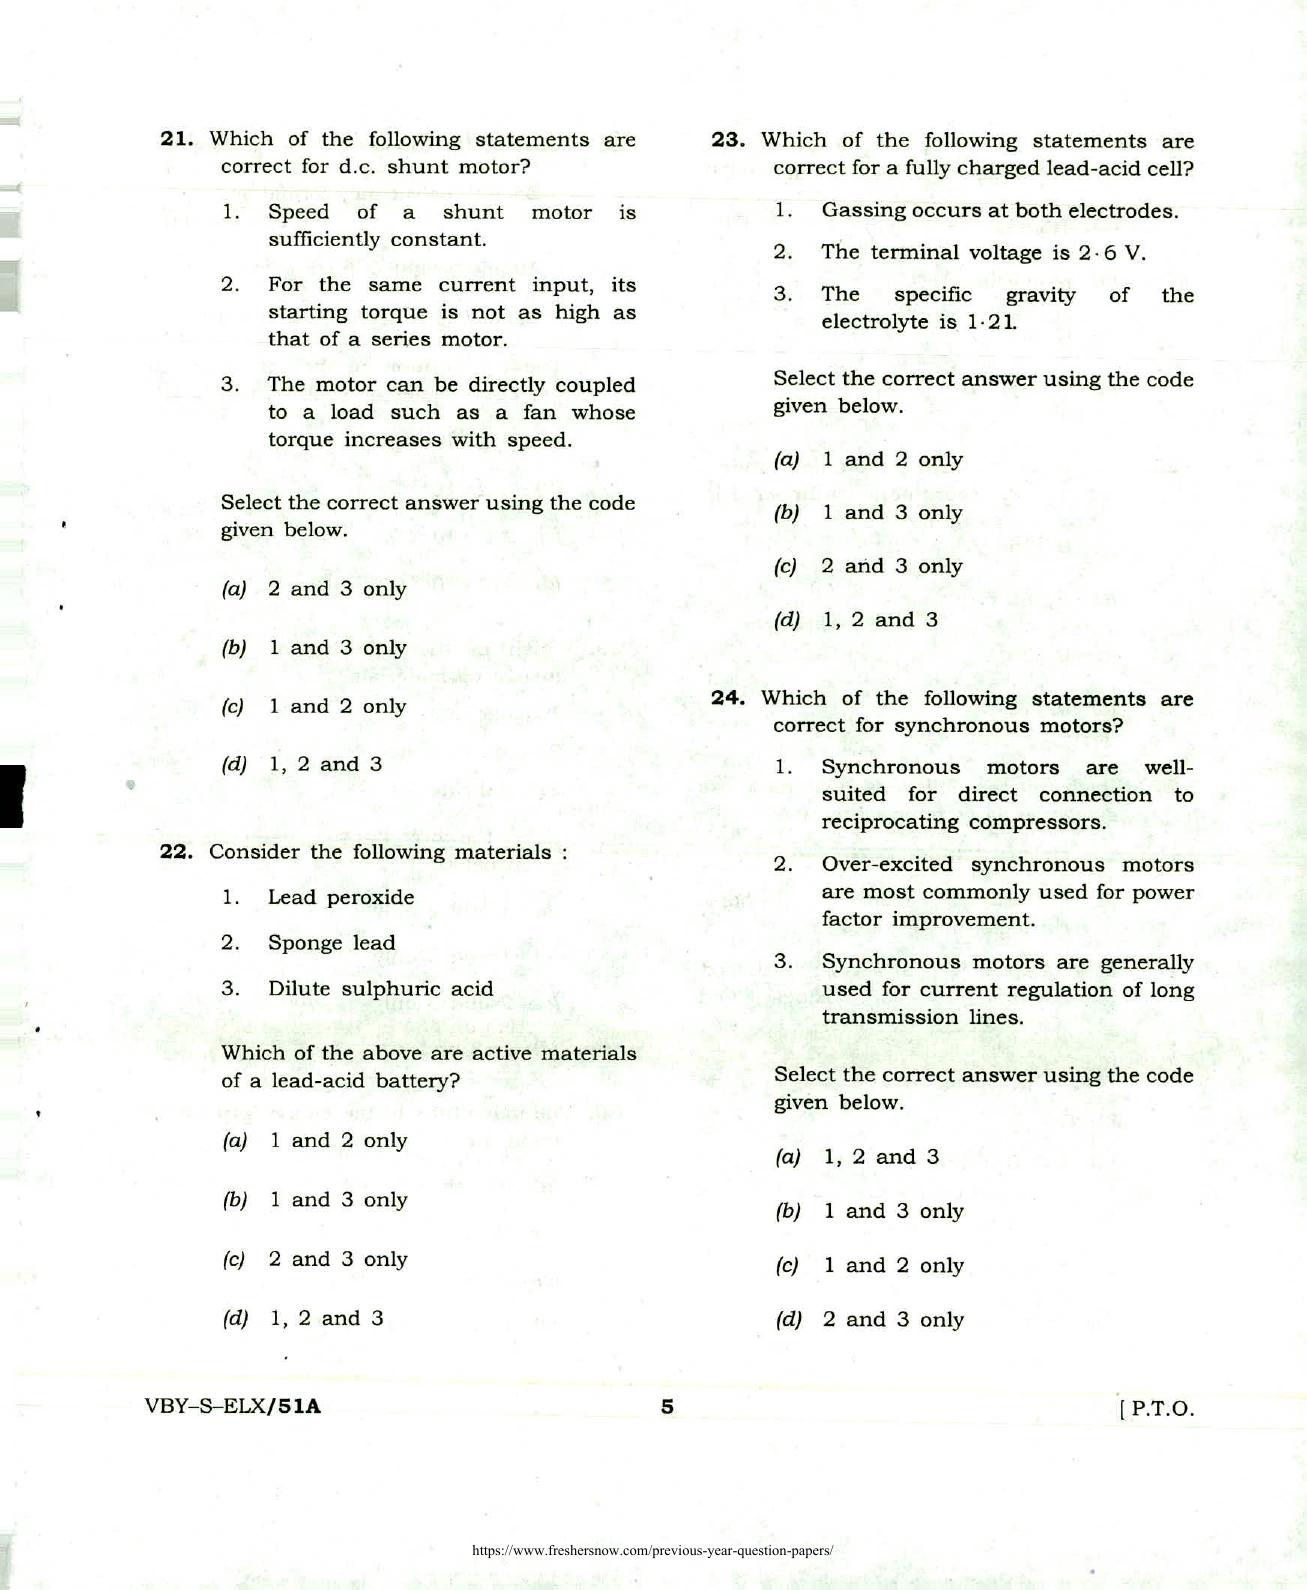 Electricity Department Lakshadweep Sample Papers: Electronic Engineering - Page 5